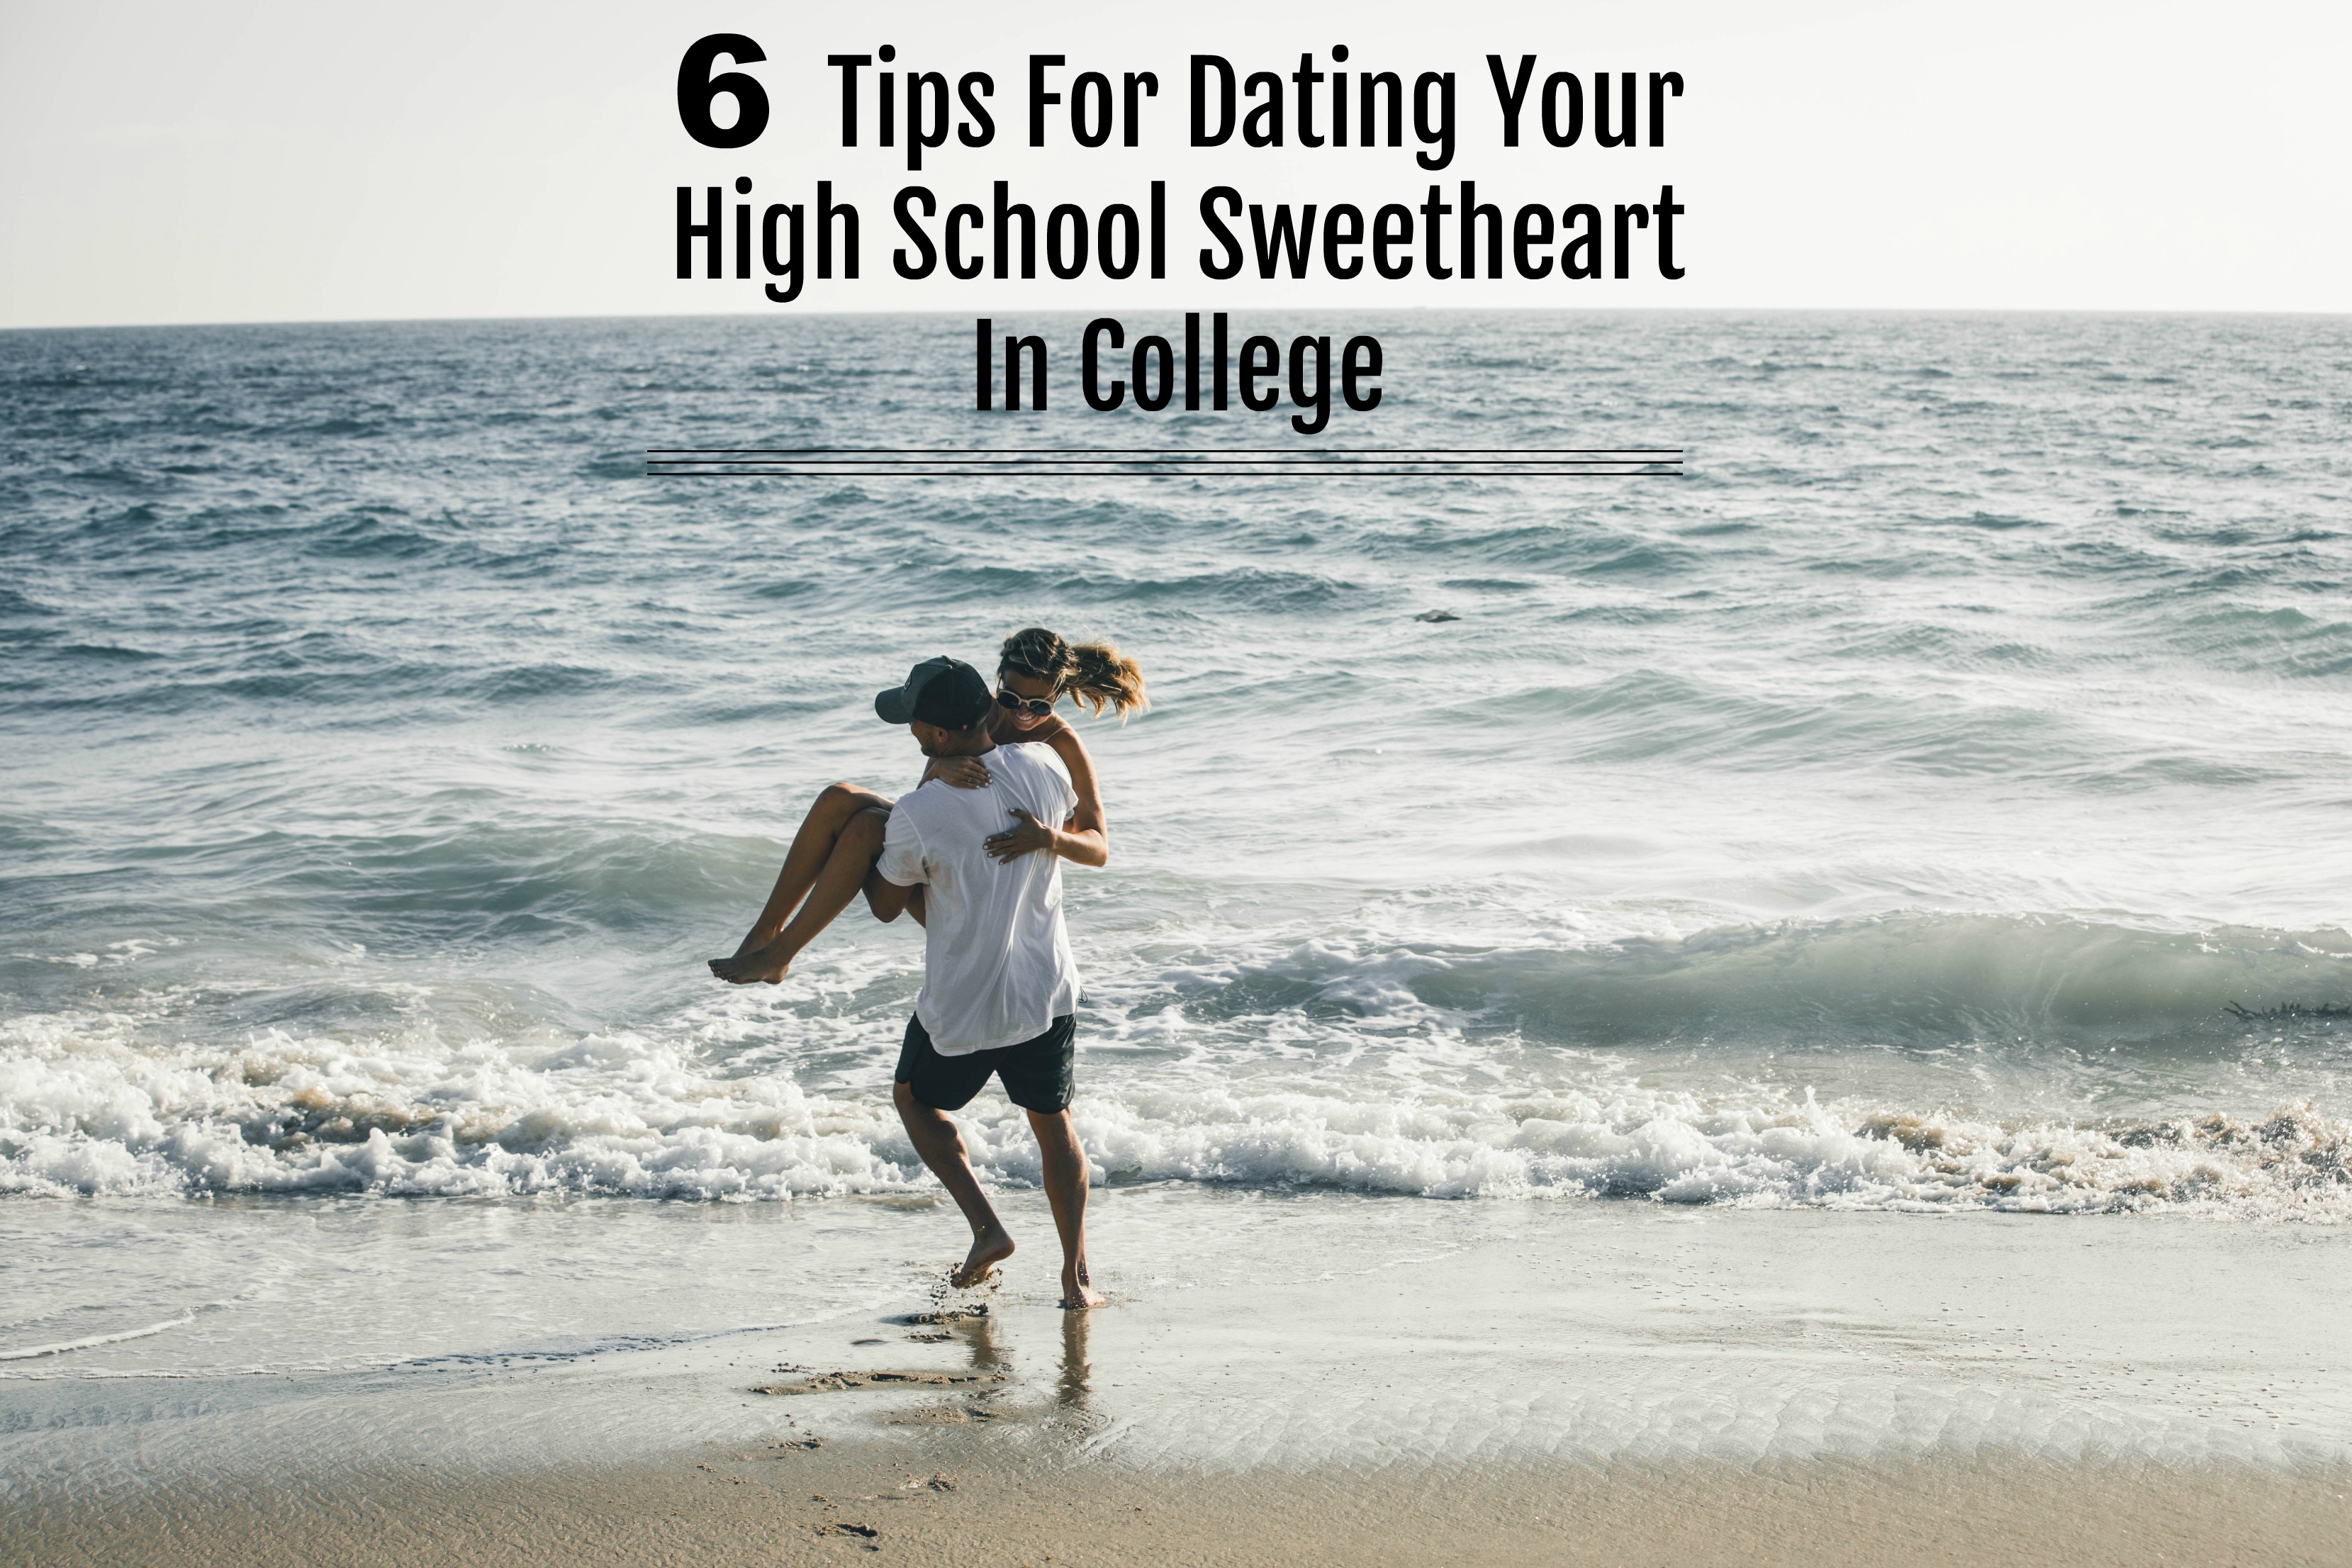 6 Tips For Dating Your High School Sweetheart In College